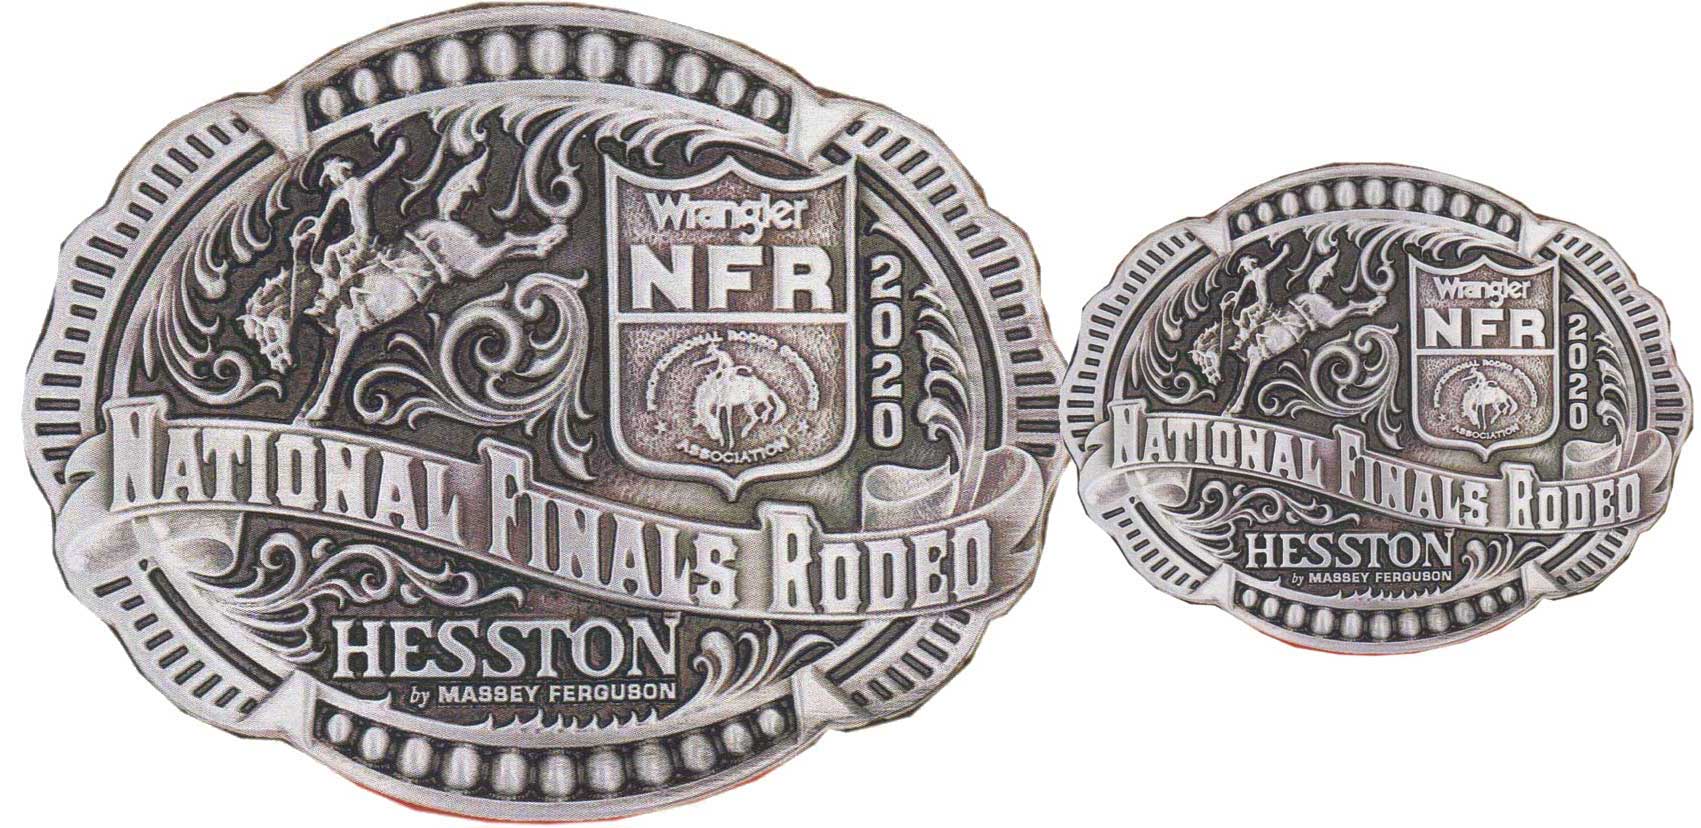 Youth 2010 Hesston National Finals Rodeo Belt Buckle 